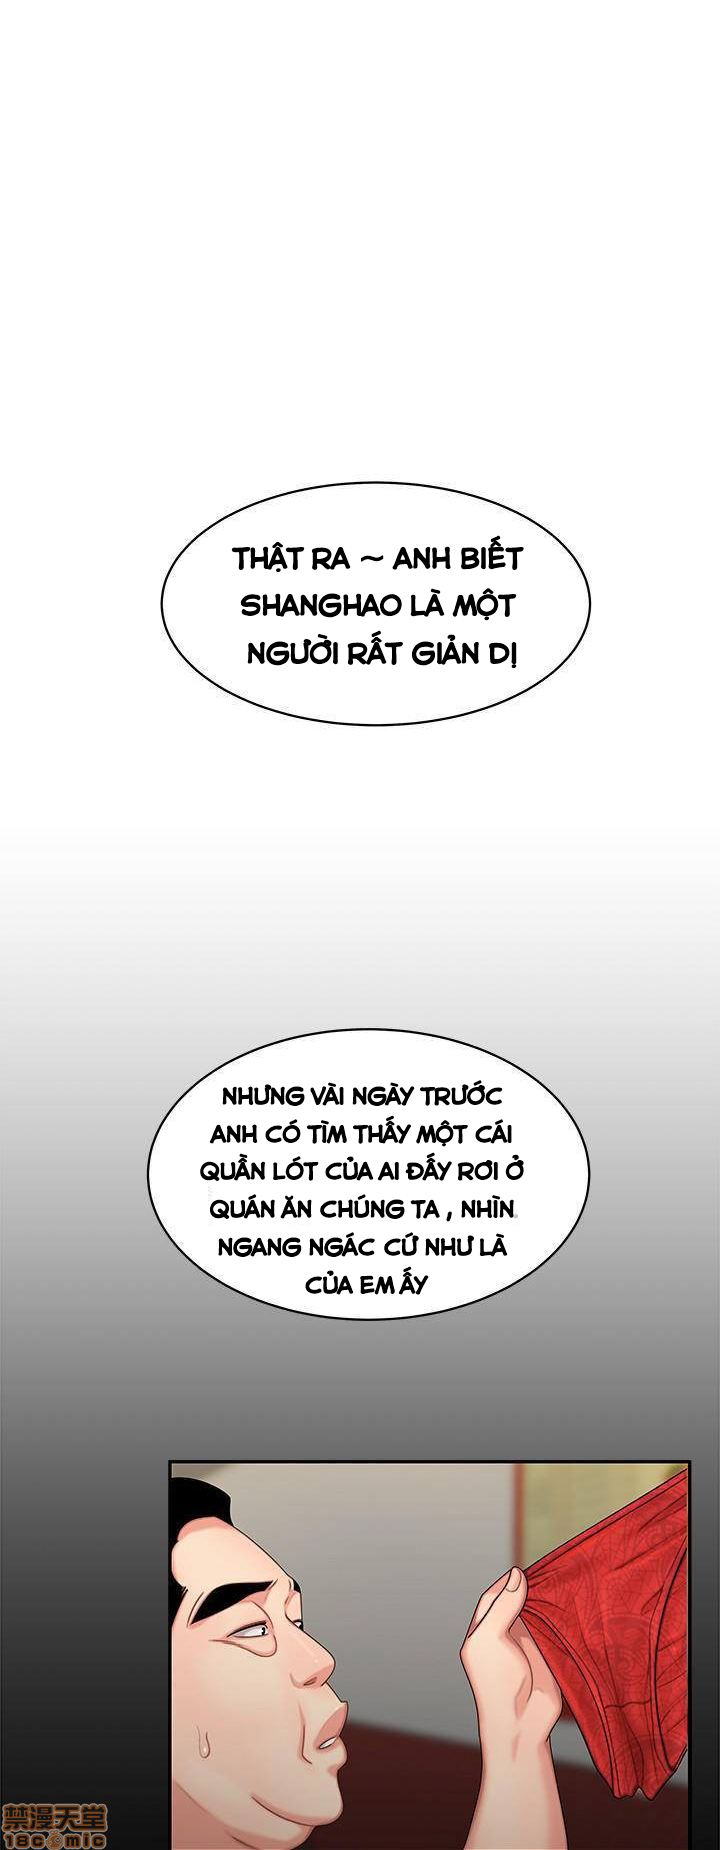 Chapter 006 : Chapter 06 ảnh 10